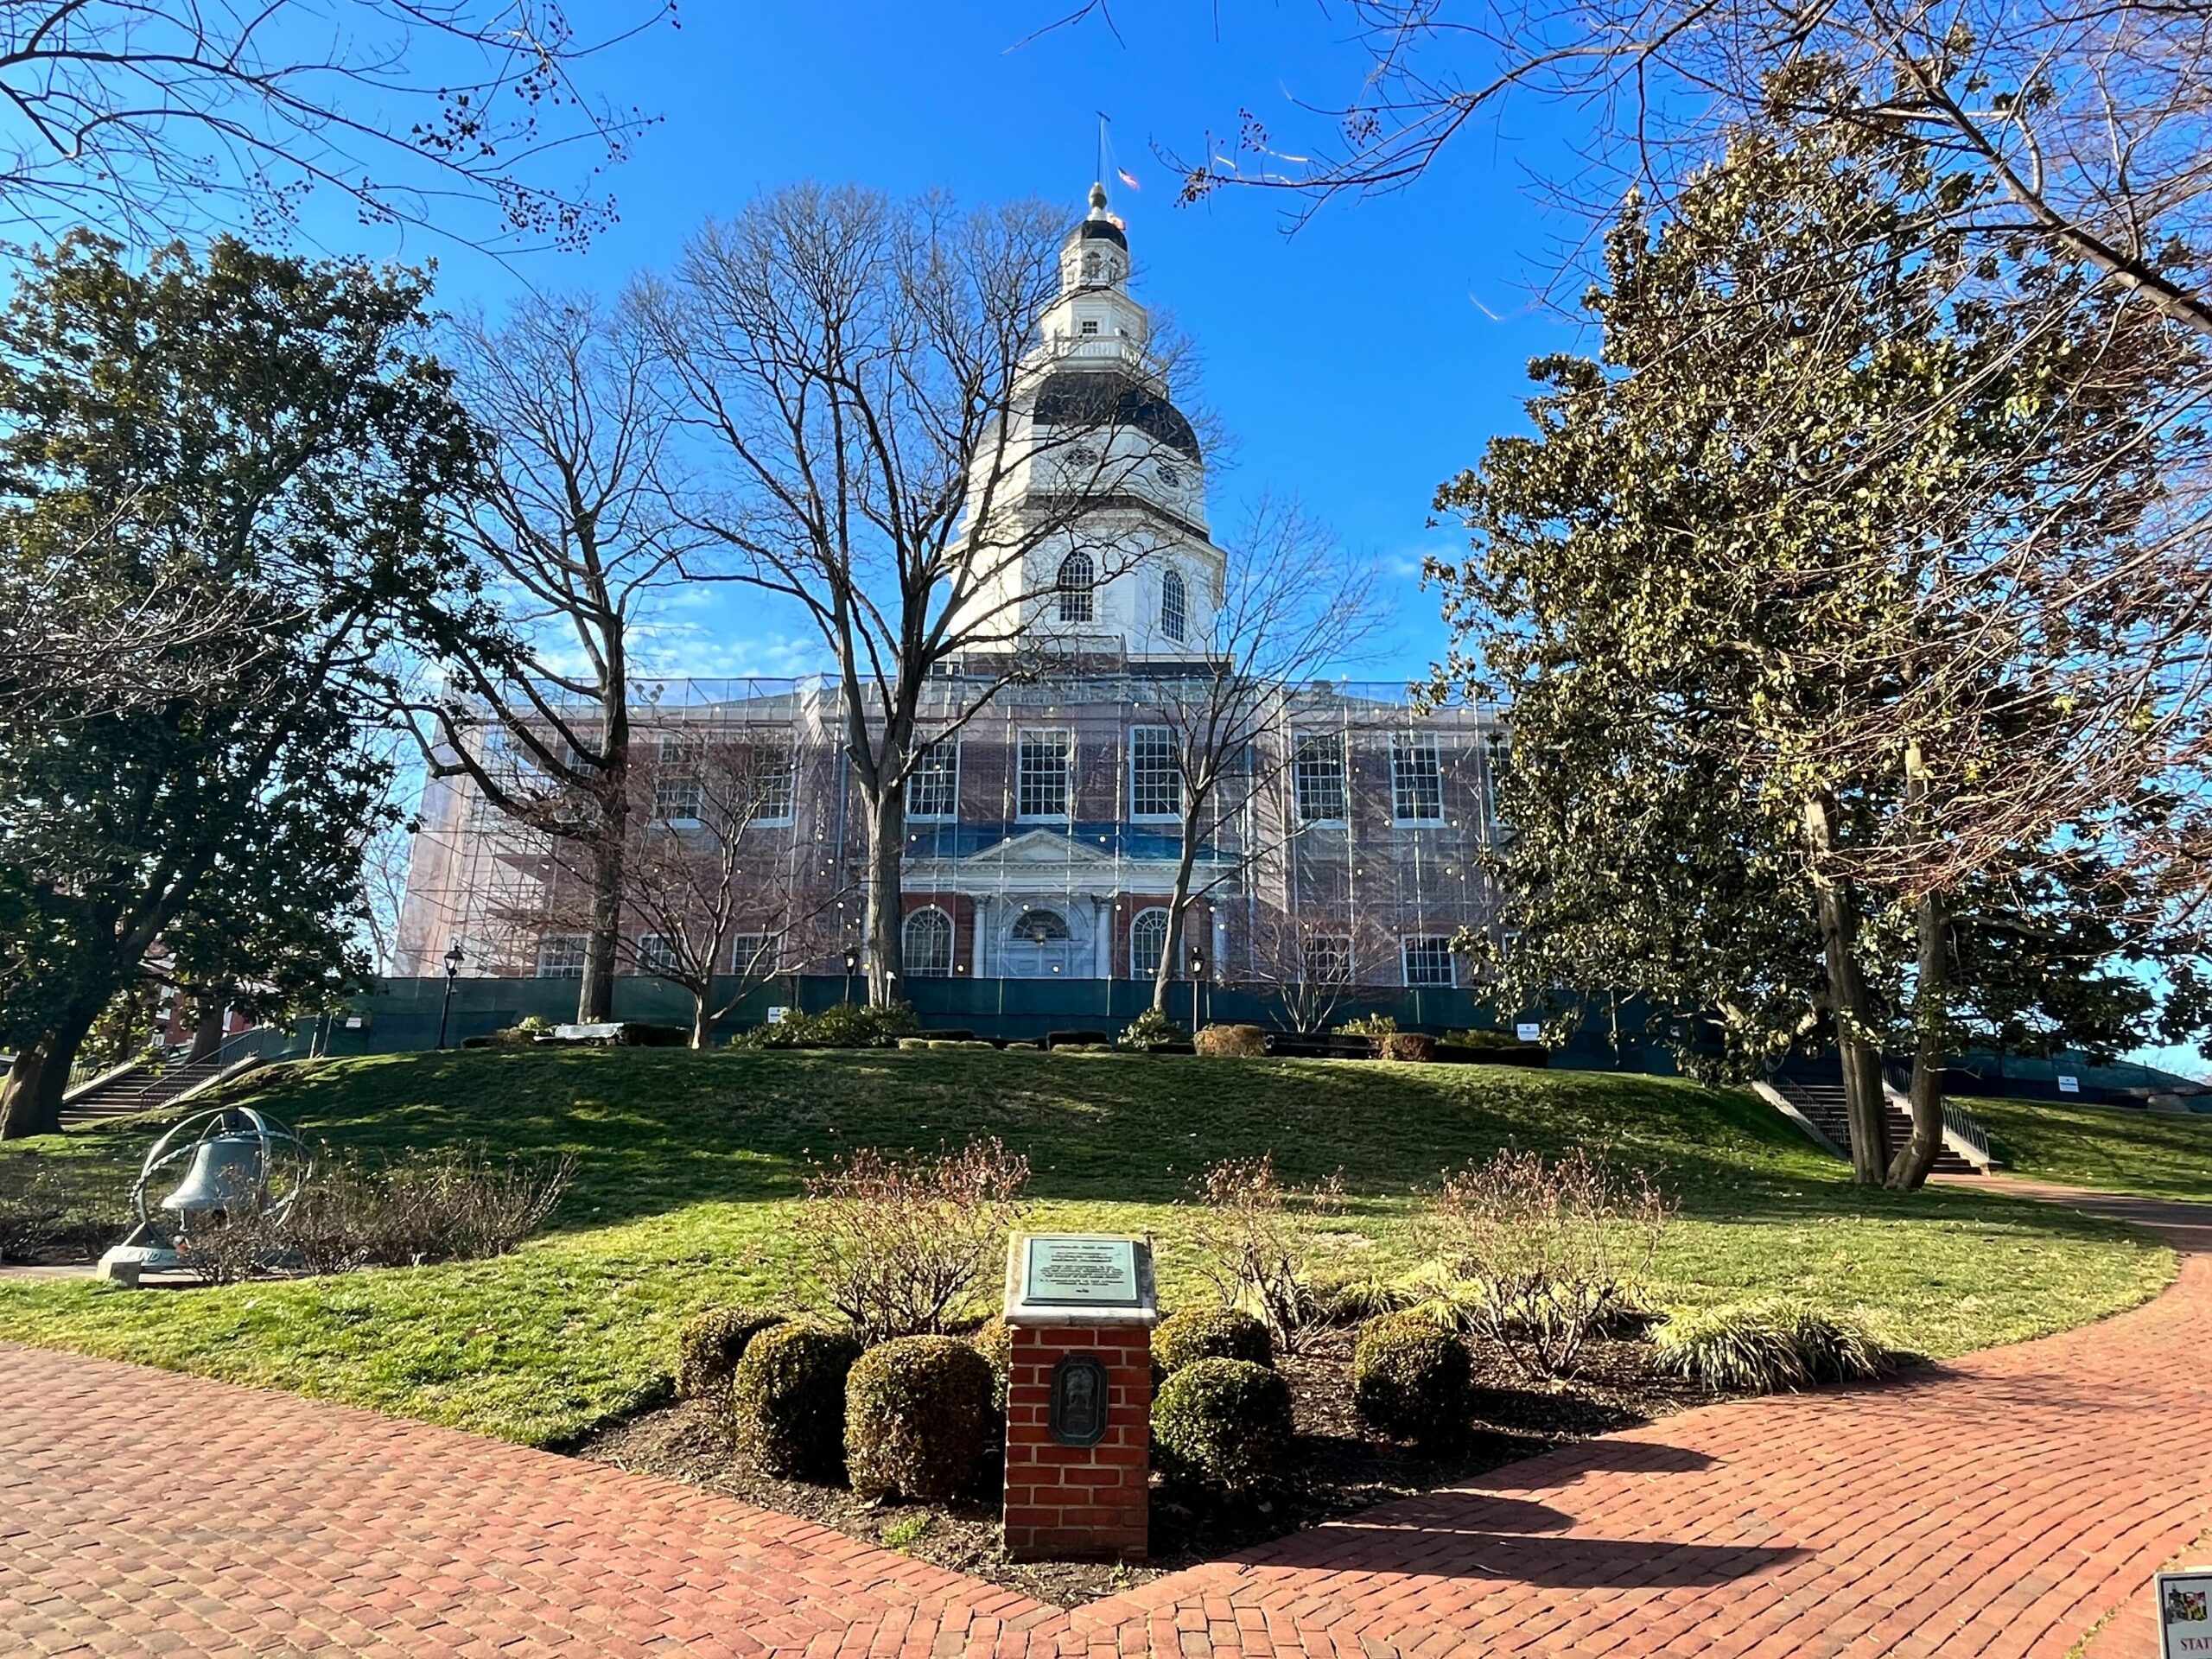 The Maryland State House in Annapolis.